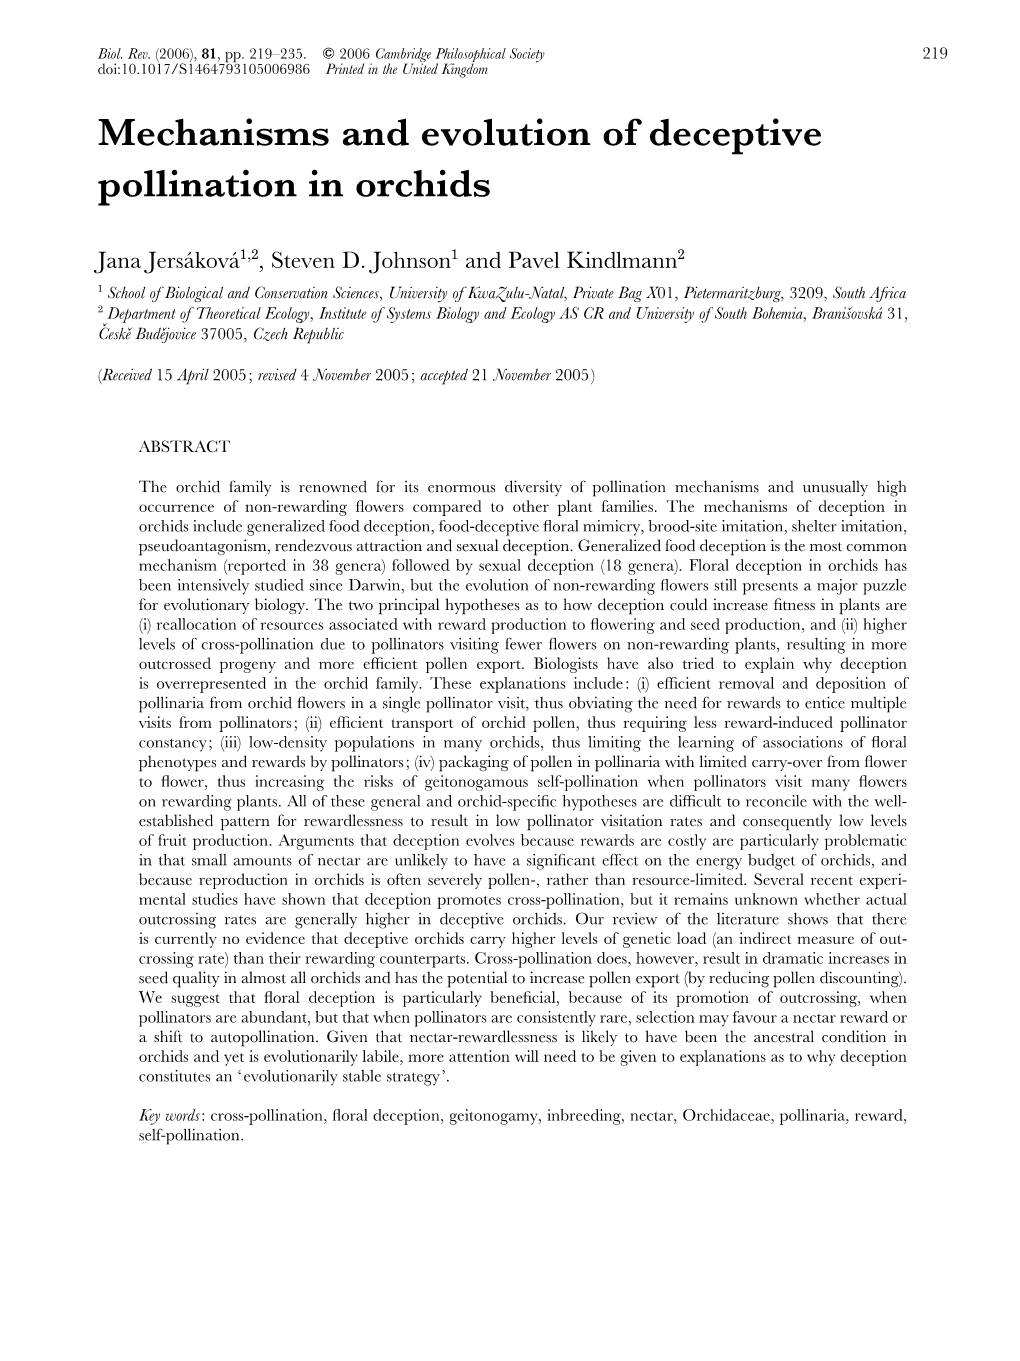 Mechanisms and Evolution of Deceptive Pollination in Orchids